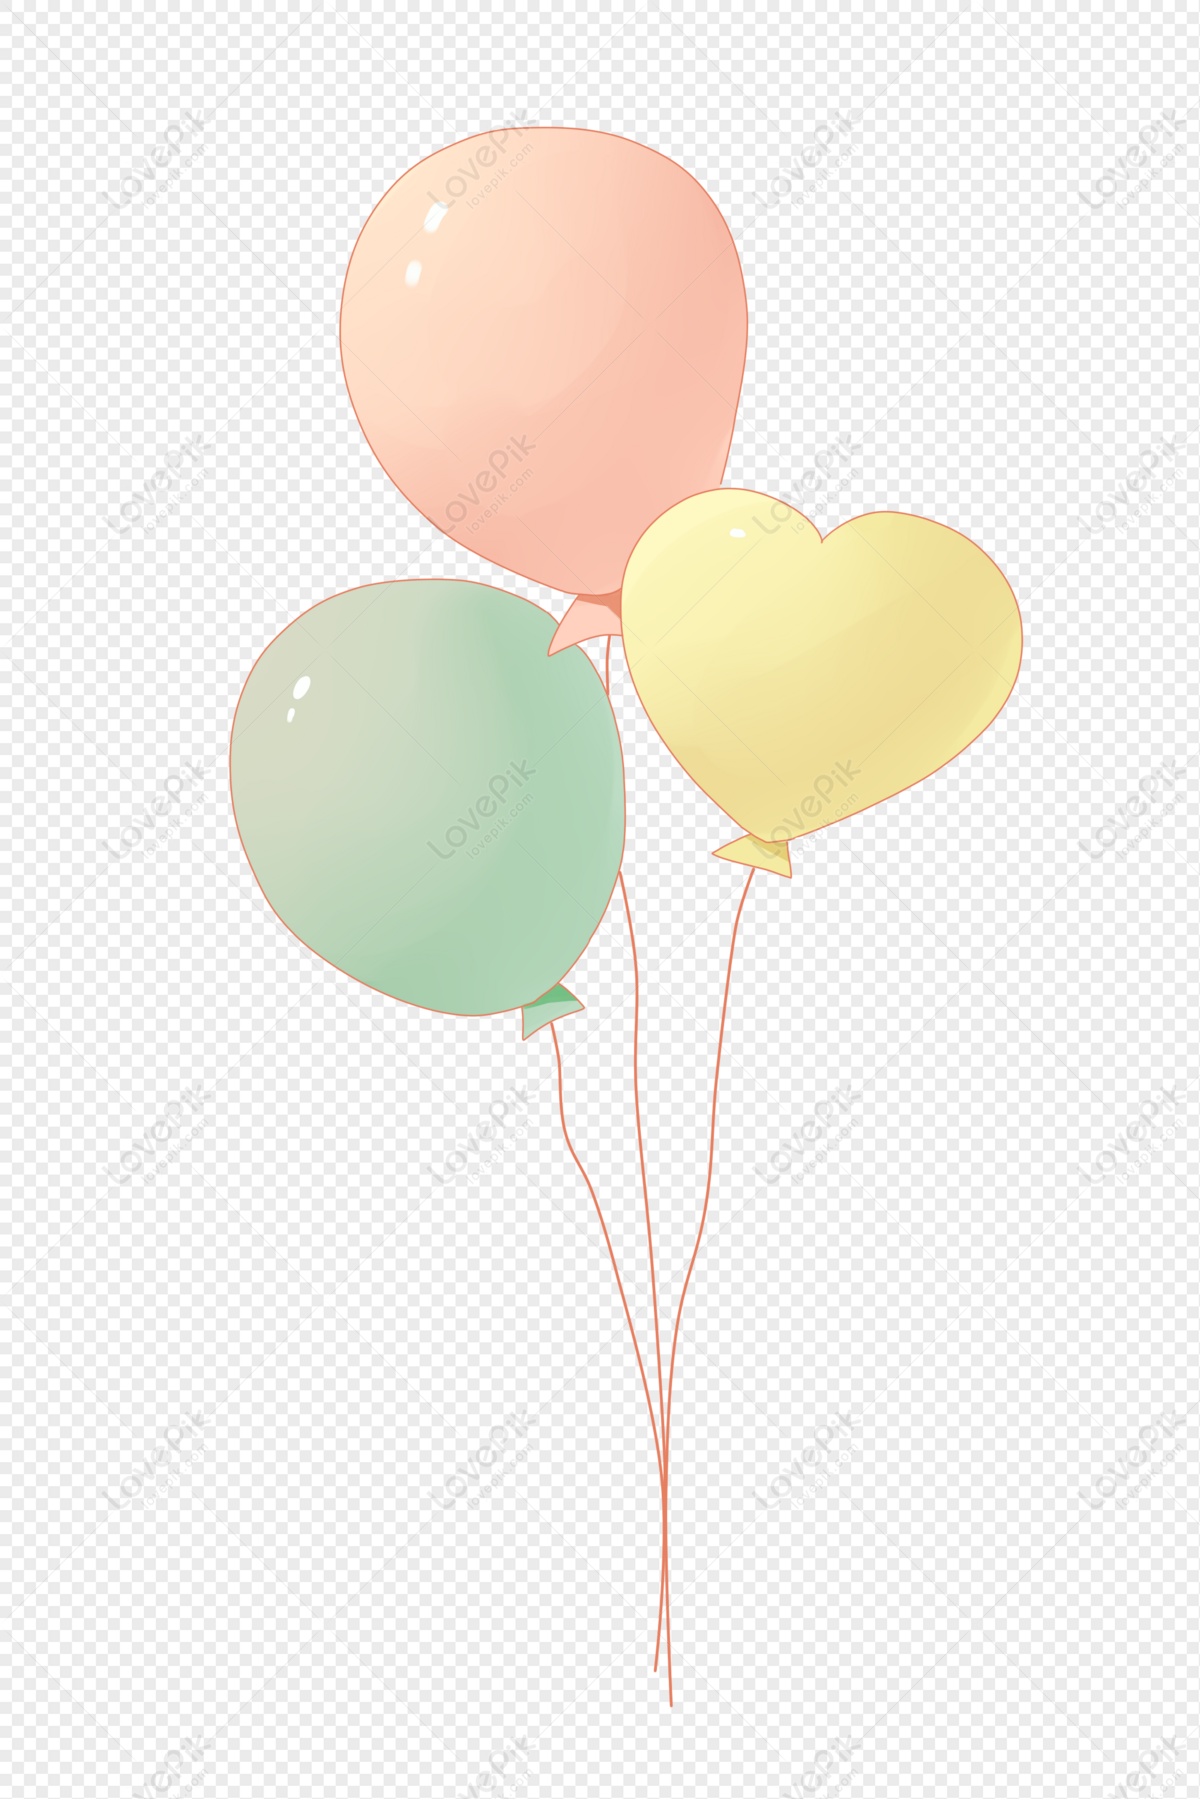 Hand Drawn Small Fresh Watercolor Cartoon Balloons Colorful PNG Hd  Transparent Image And Clipart Image For Free Download - Lovepik | 401556894